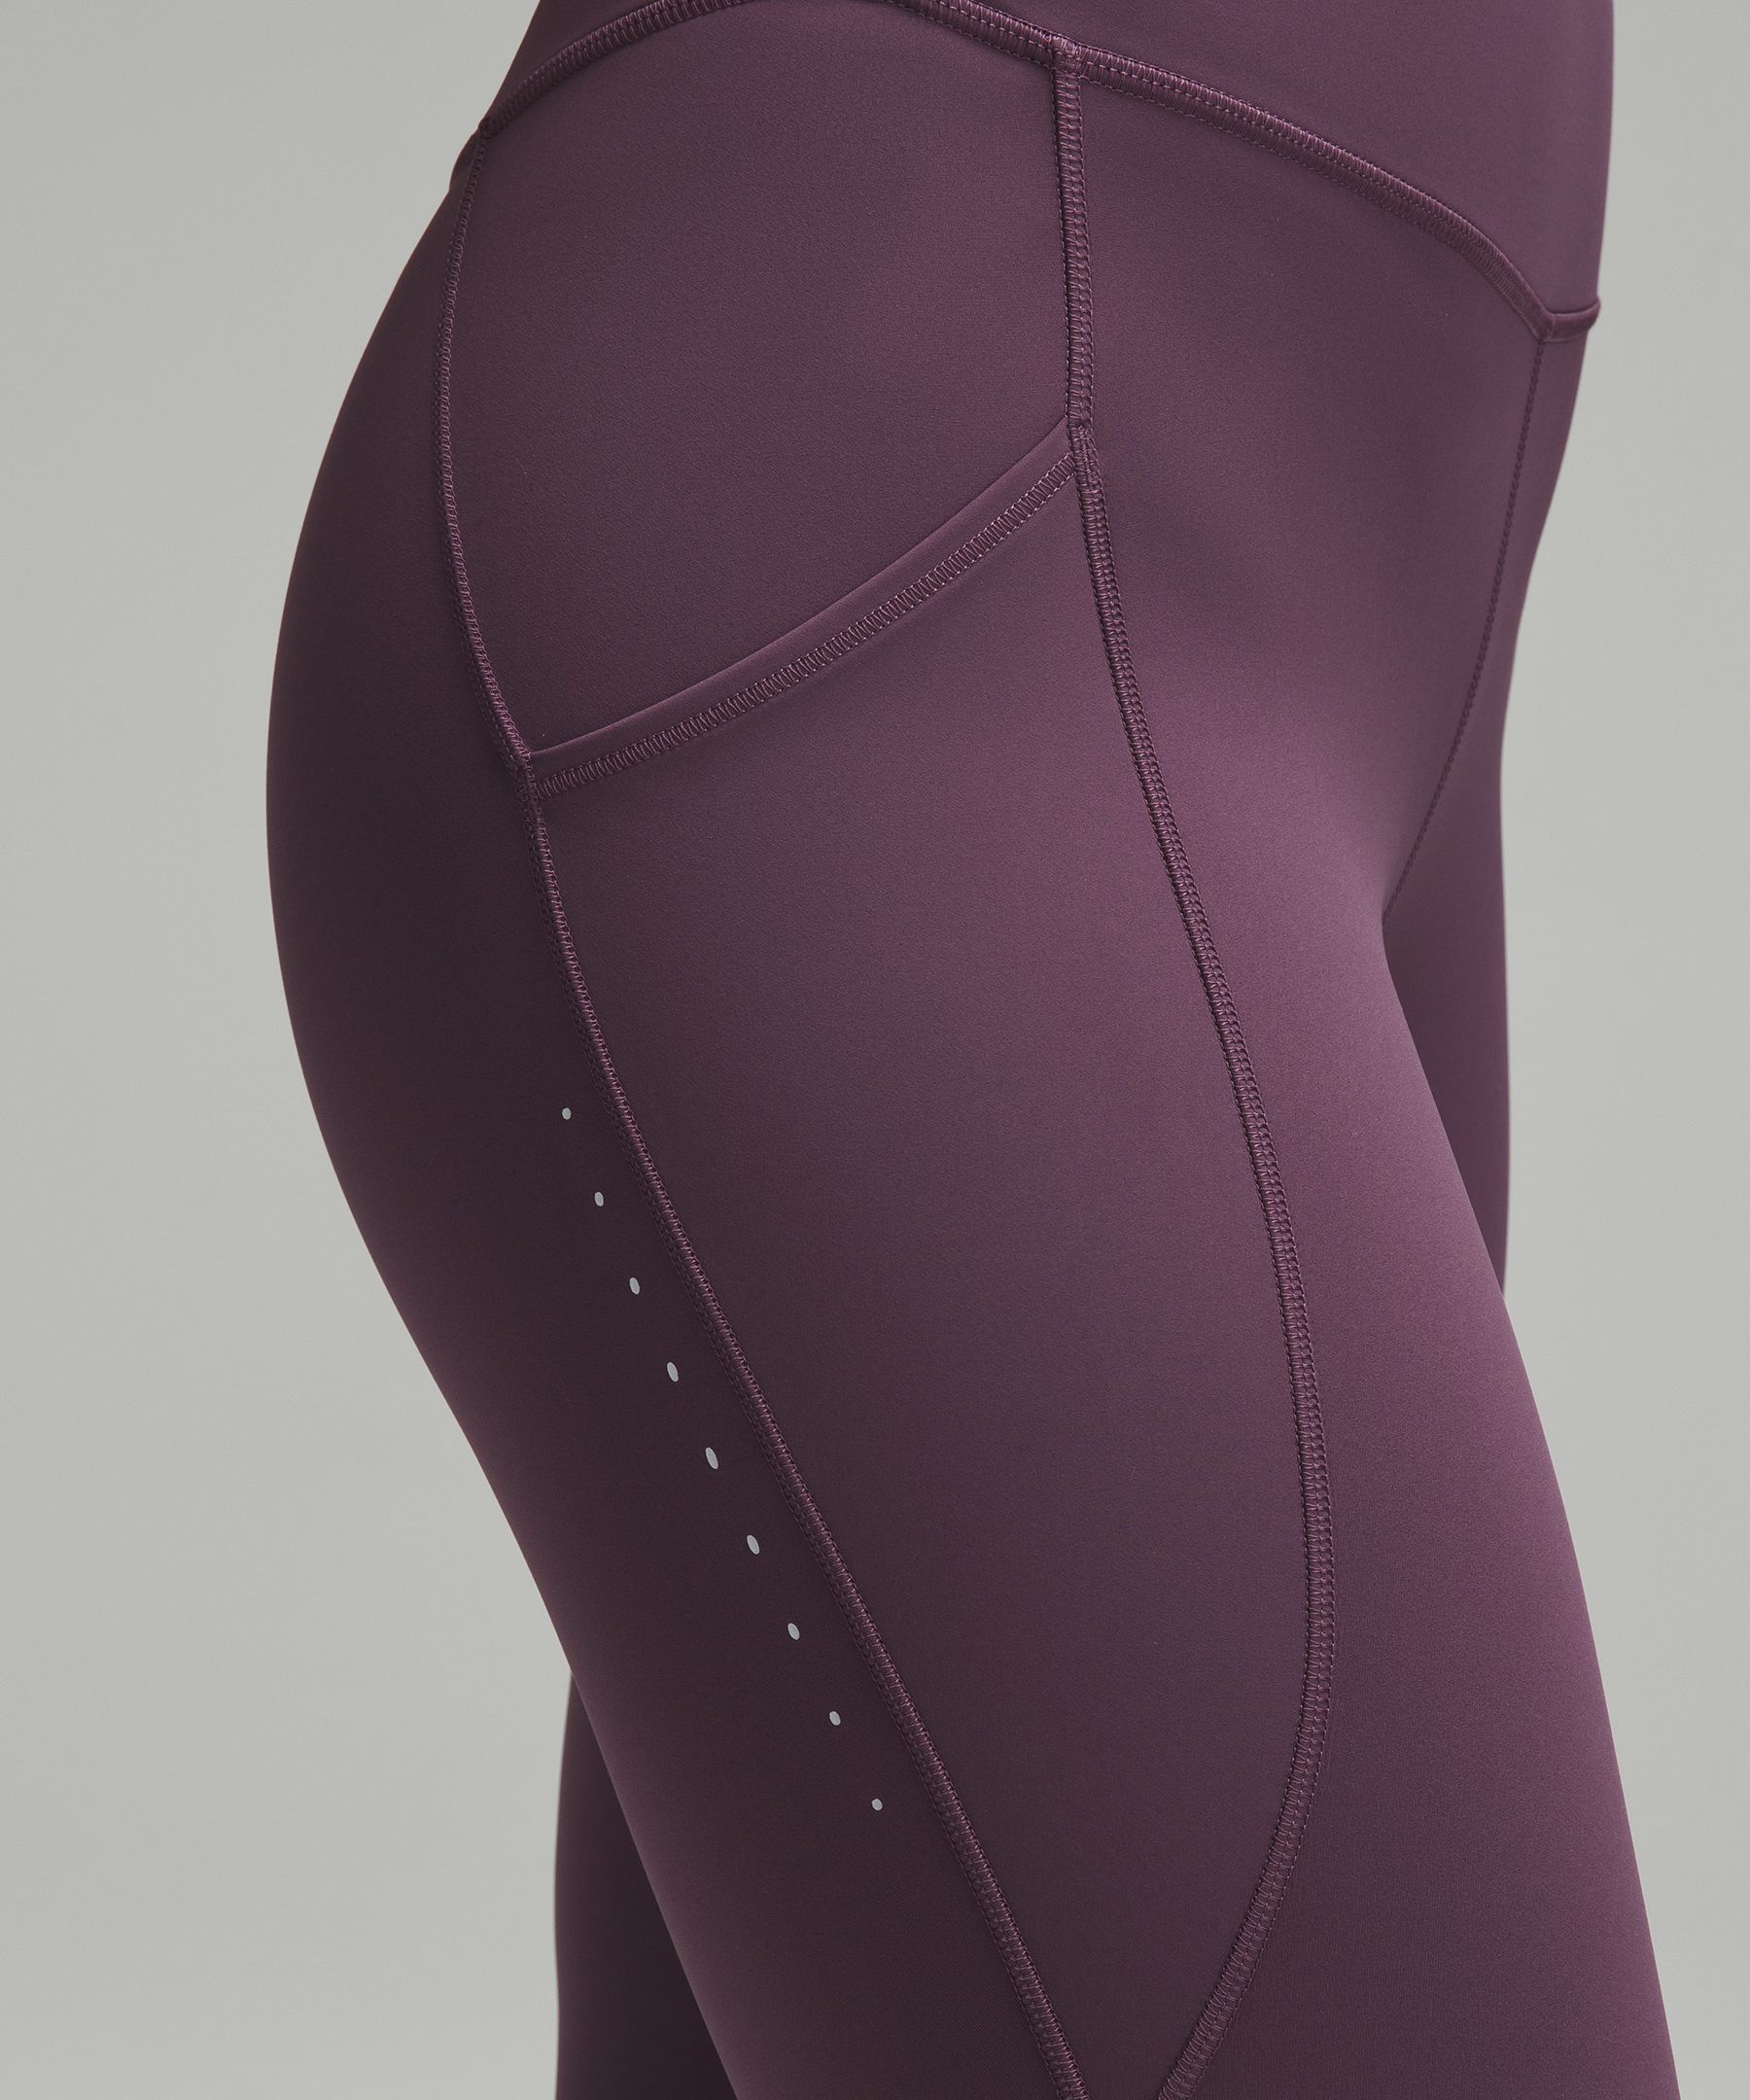 Lululemon Fast and Free Tight in 25” Violet Verbena Size S, Men's